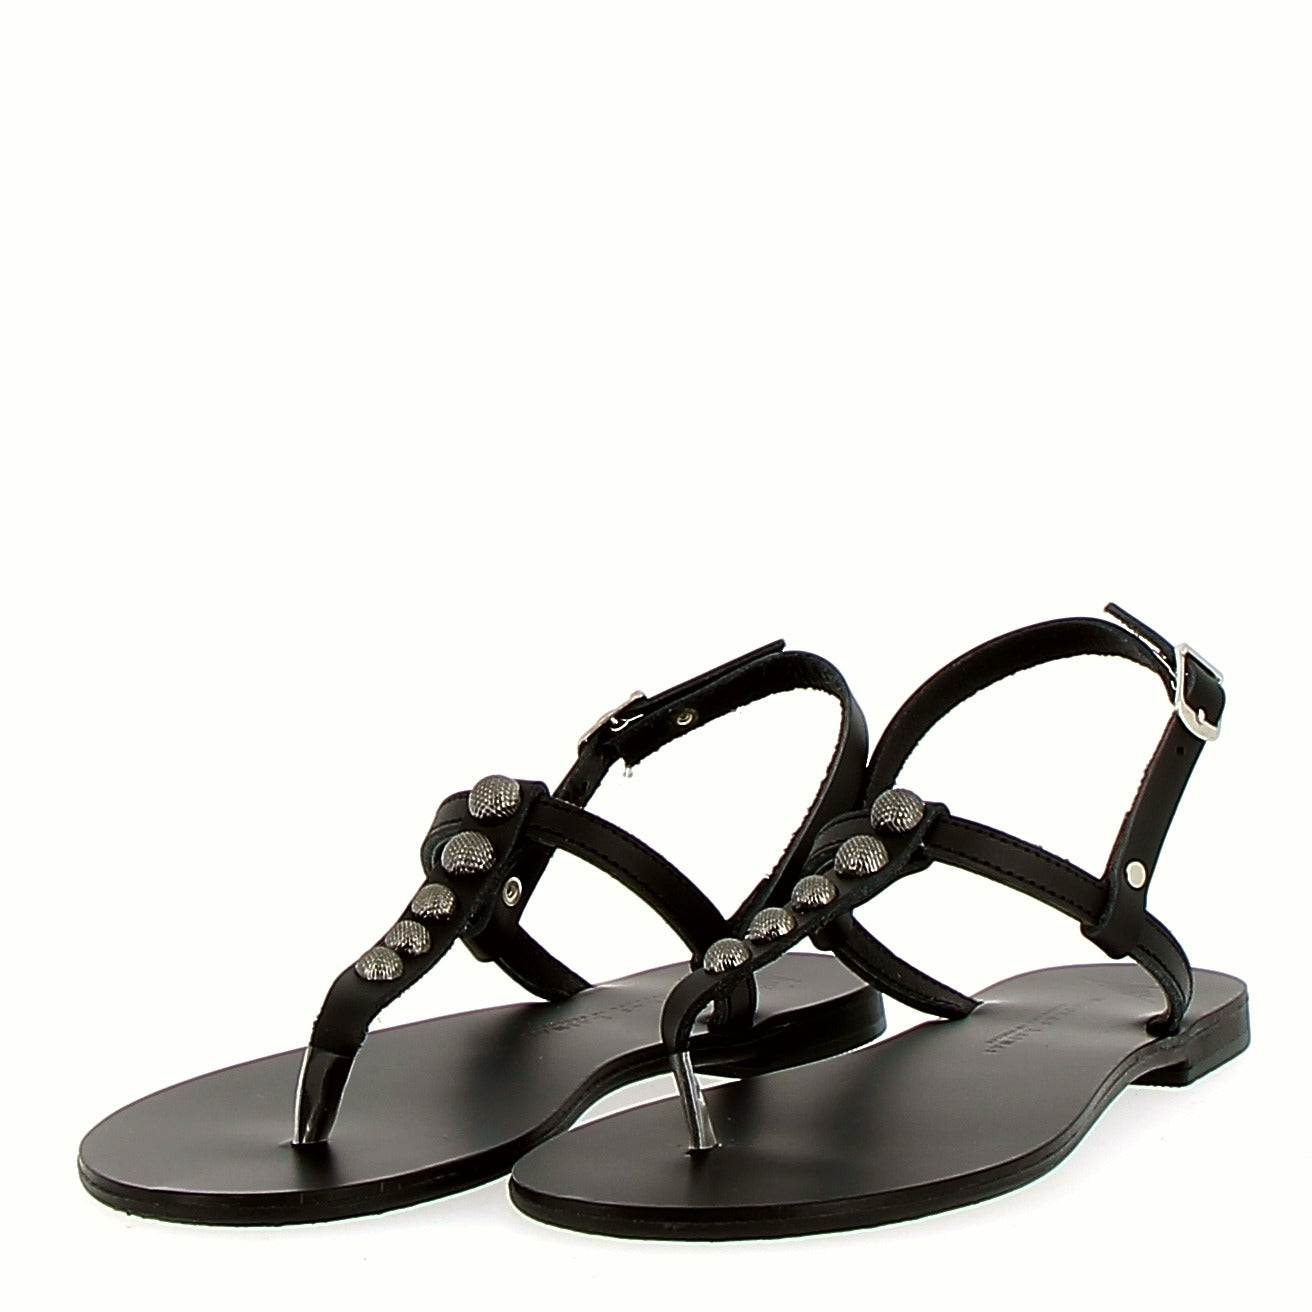 Black thong sandal with round studs